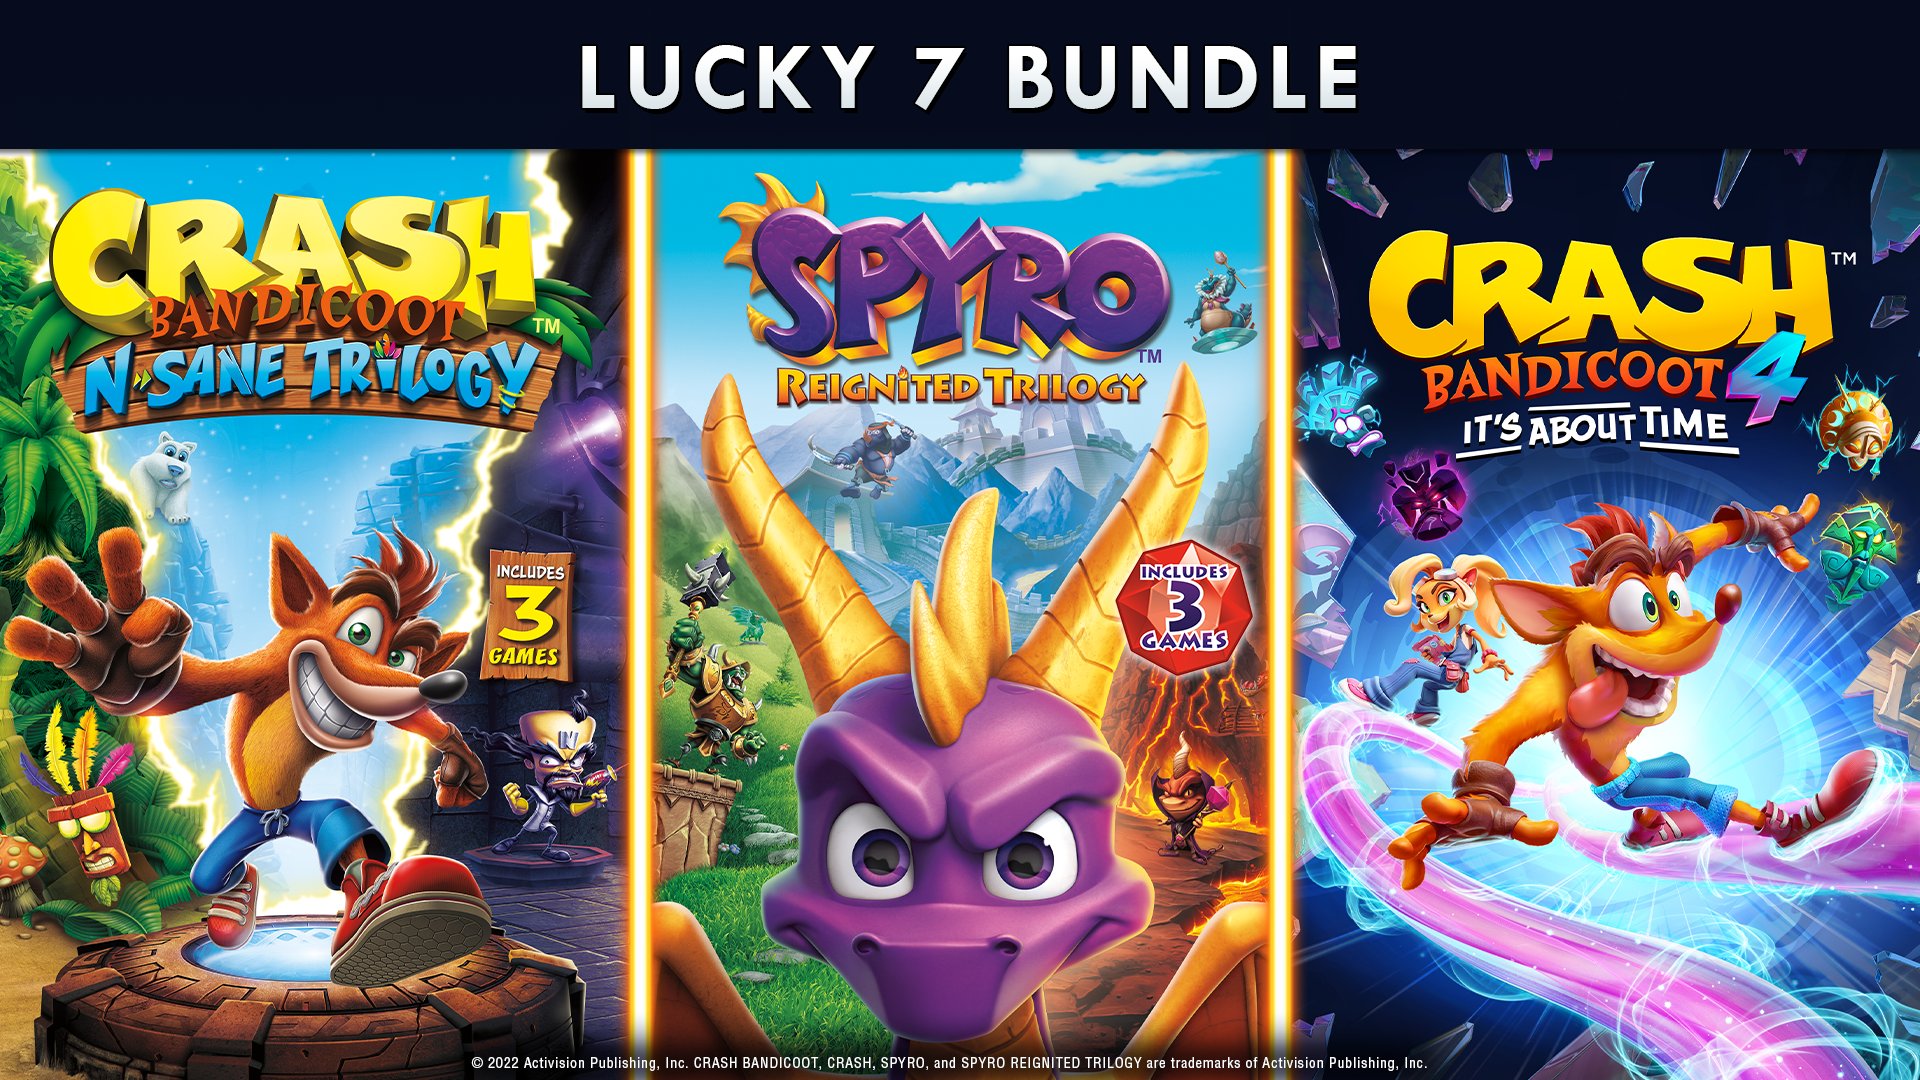 Crash Bandicoot on Twitter: "The ultimate adventure is here, as your favorite dragon and bandicoot team up in the Lucky 7 Bundle! Now available on @Steam! https://t.co/H1zkAM4UM5 #lucky7bundle /